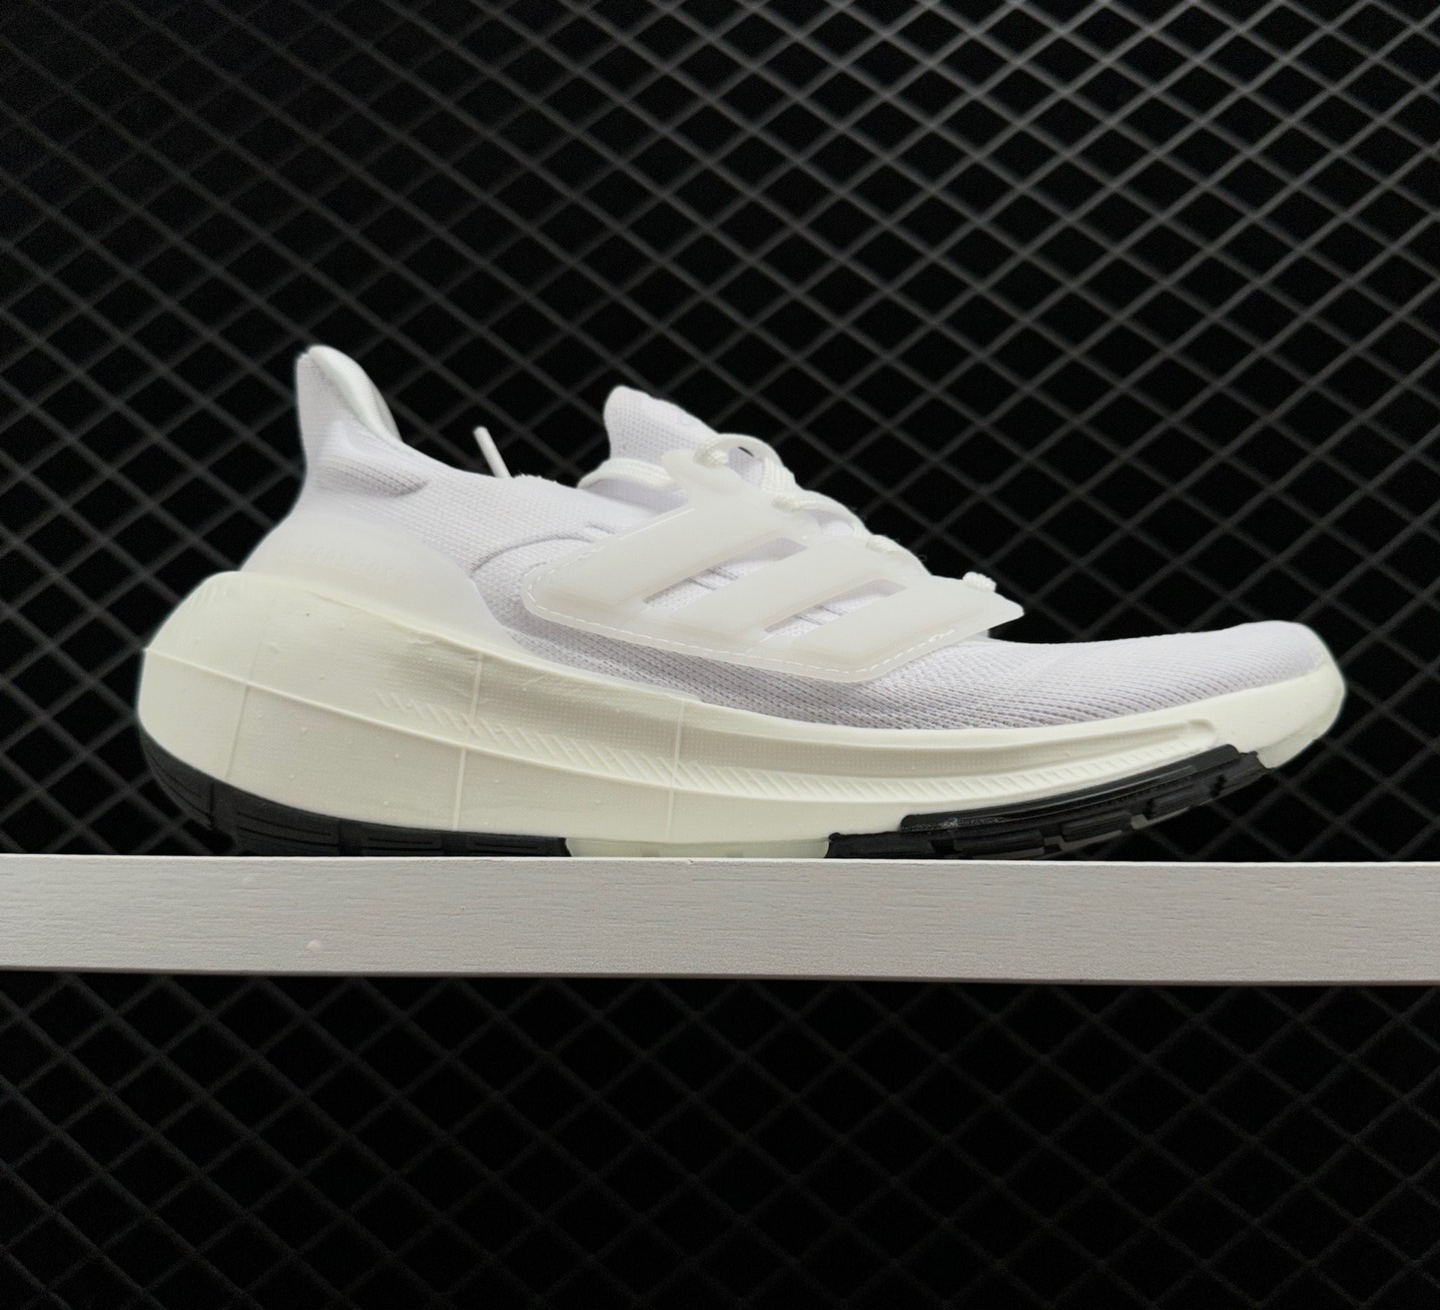 Adidas Ultra Boost Light Triple White GY9350 - Ultimate Comfort and Style.